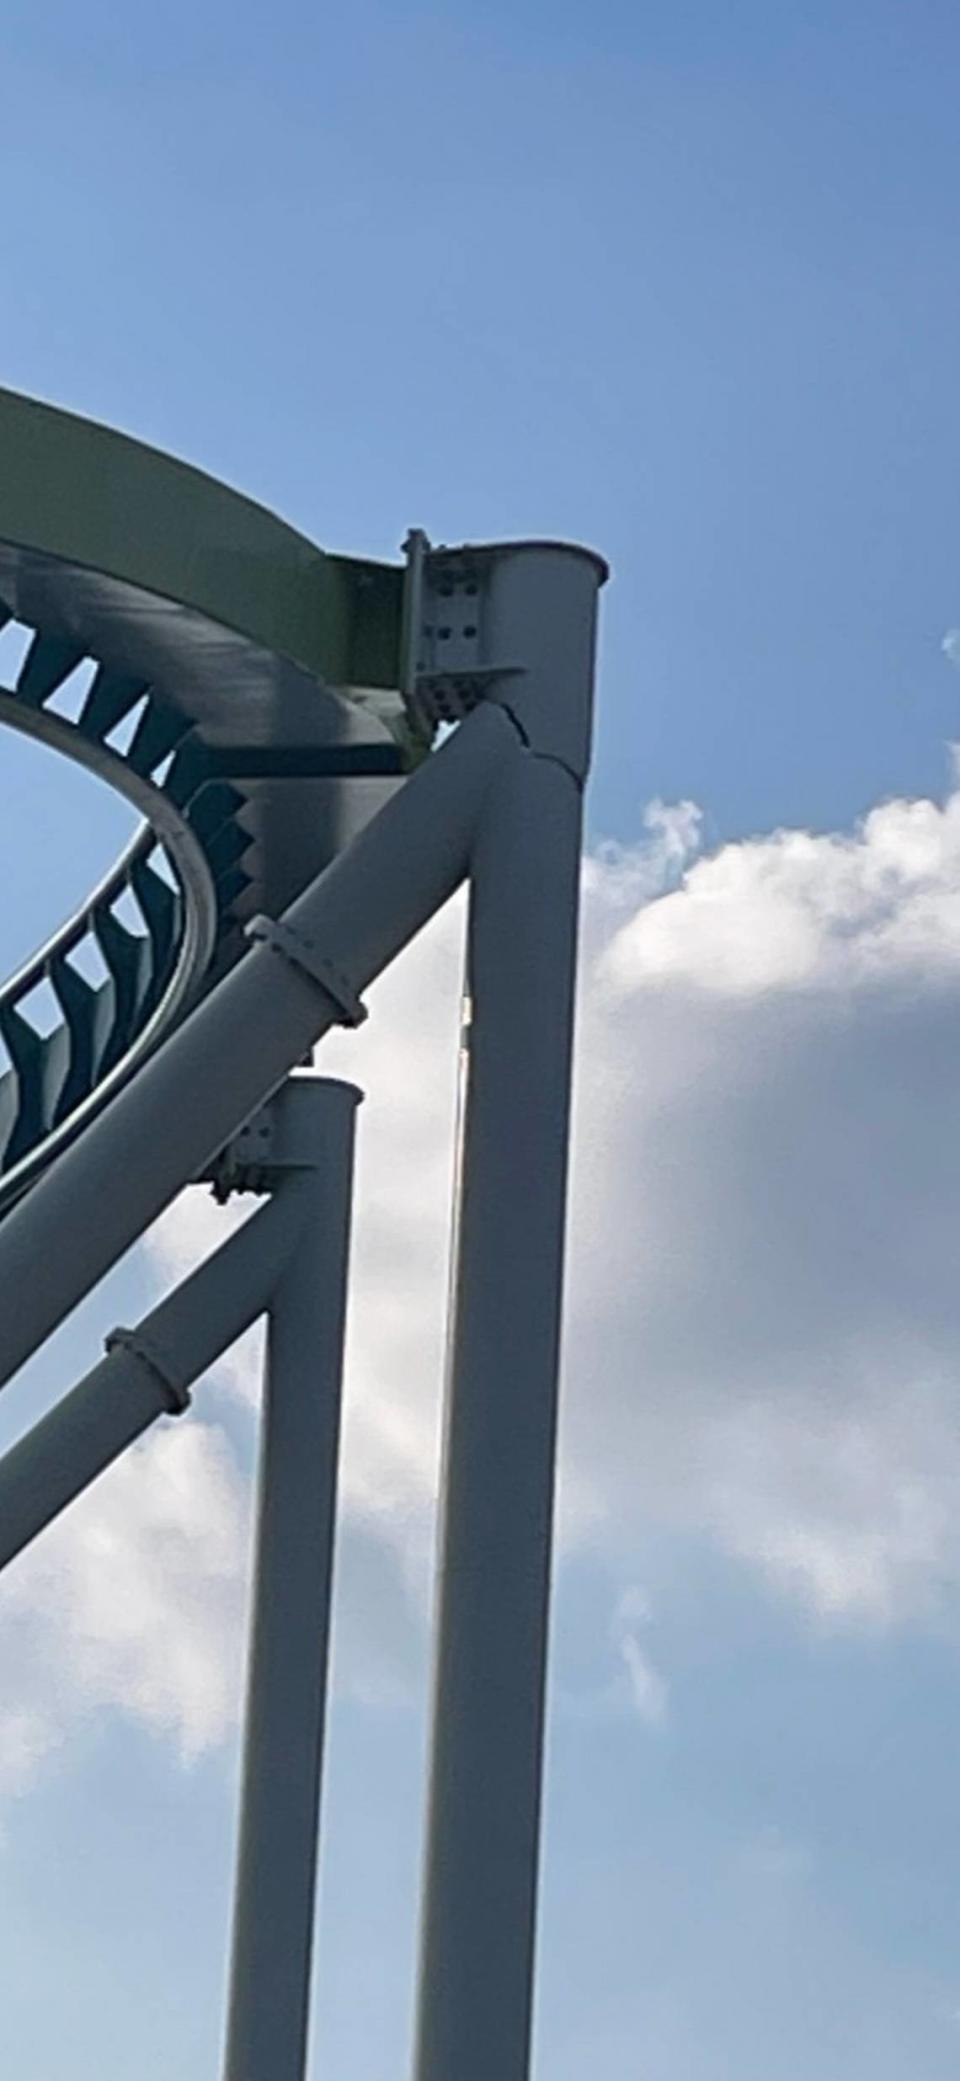 A crack turned into a fracture on Friday for a support column for the Fury 325 roller coaster at Carowinds in North Carolina.